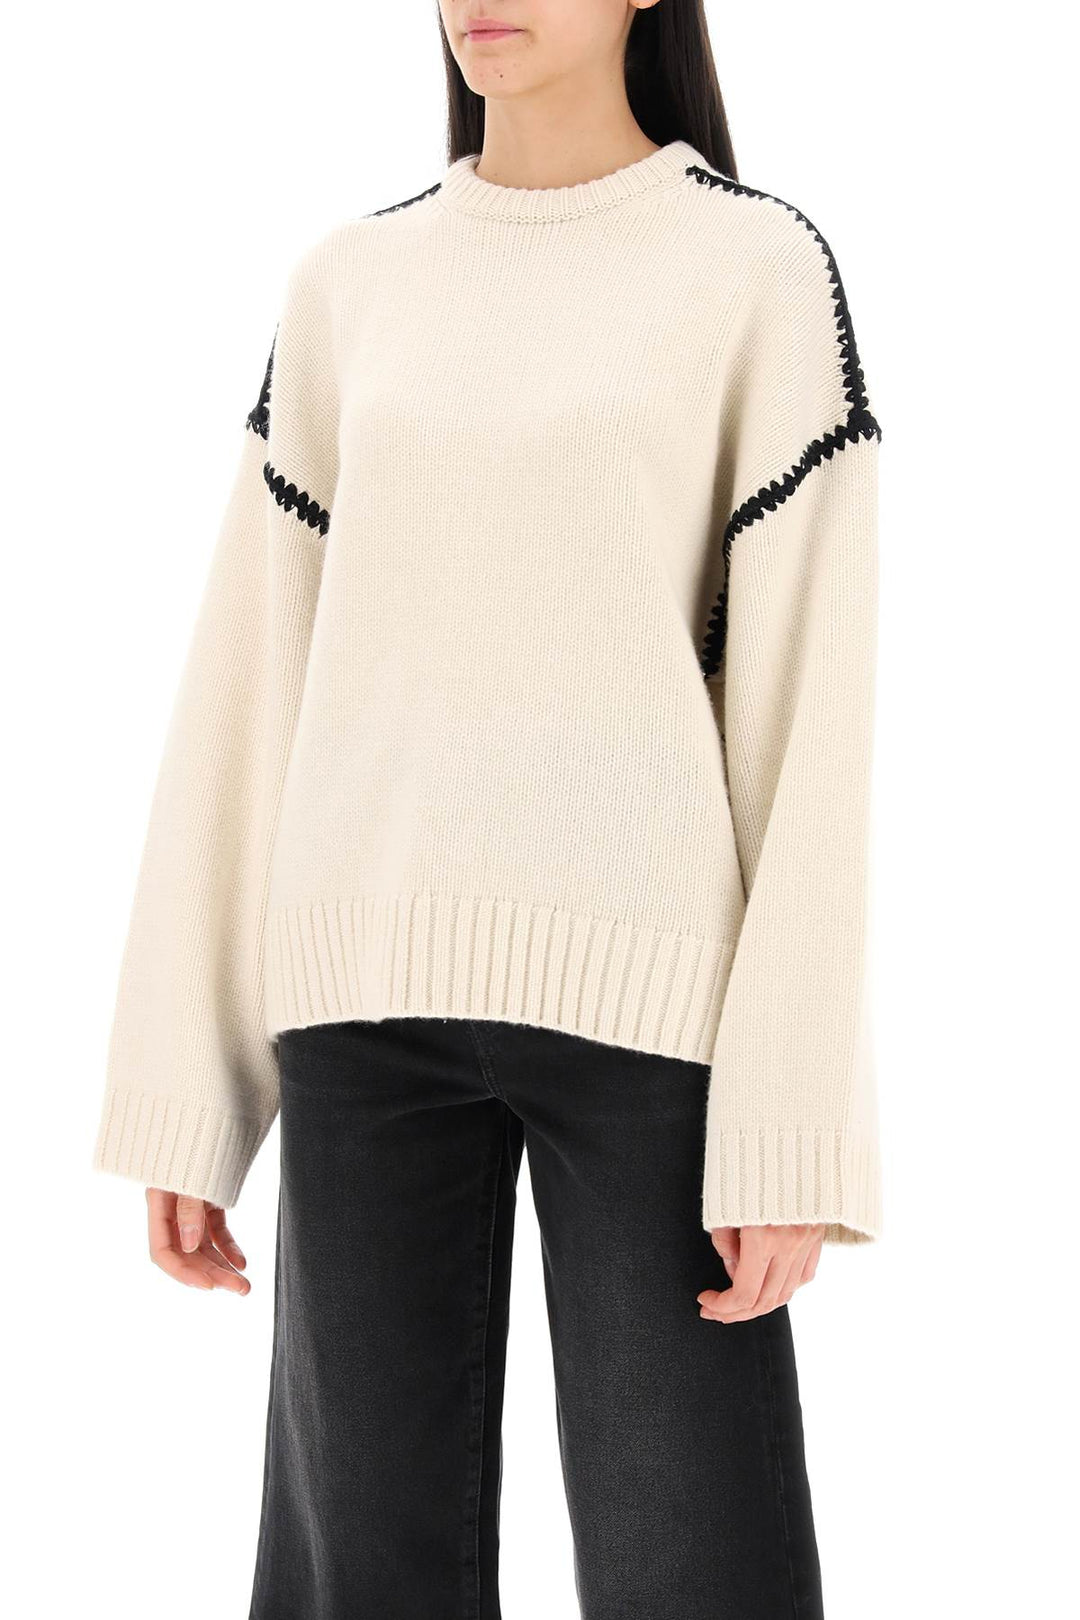 Toteme Sweater With Contrast Embroideries   Neutro